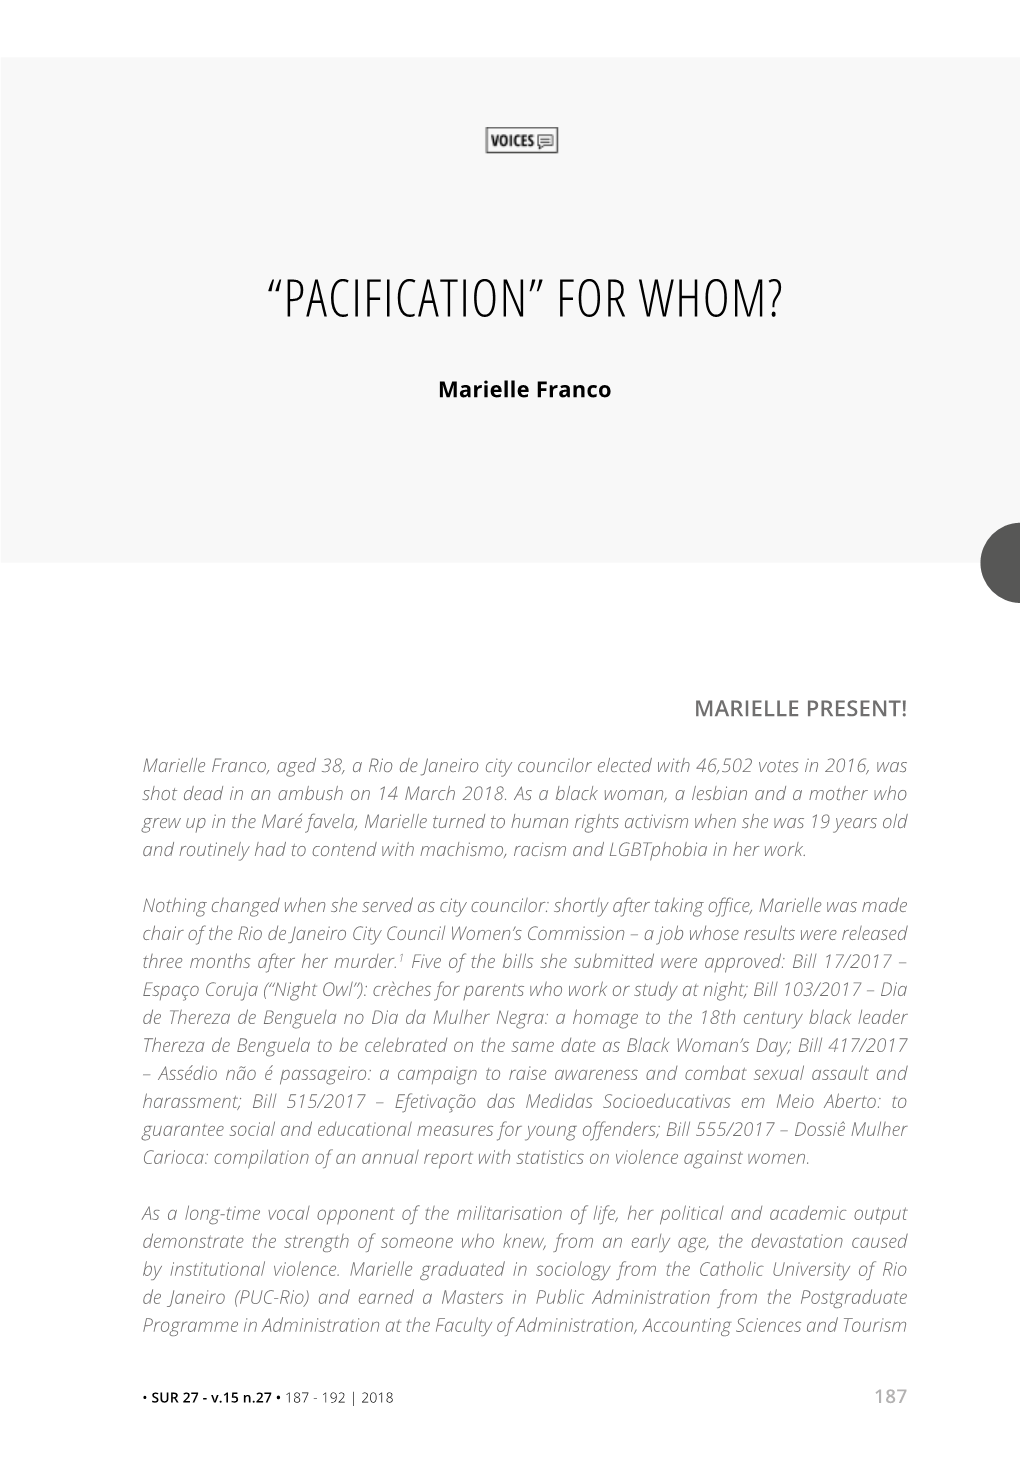 “Pacification” for Whom?